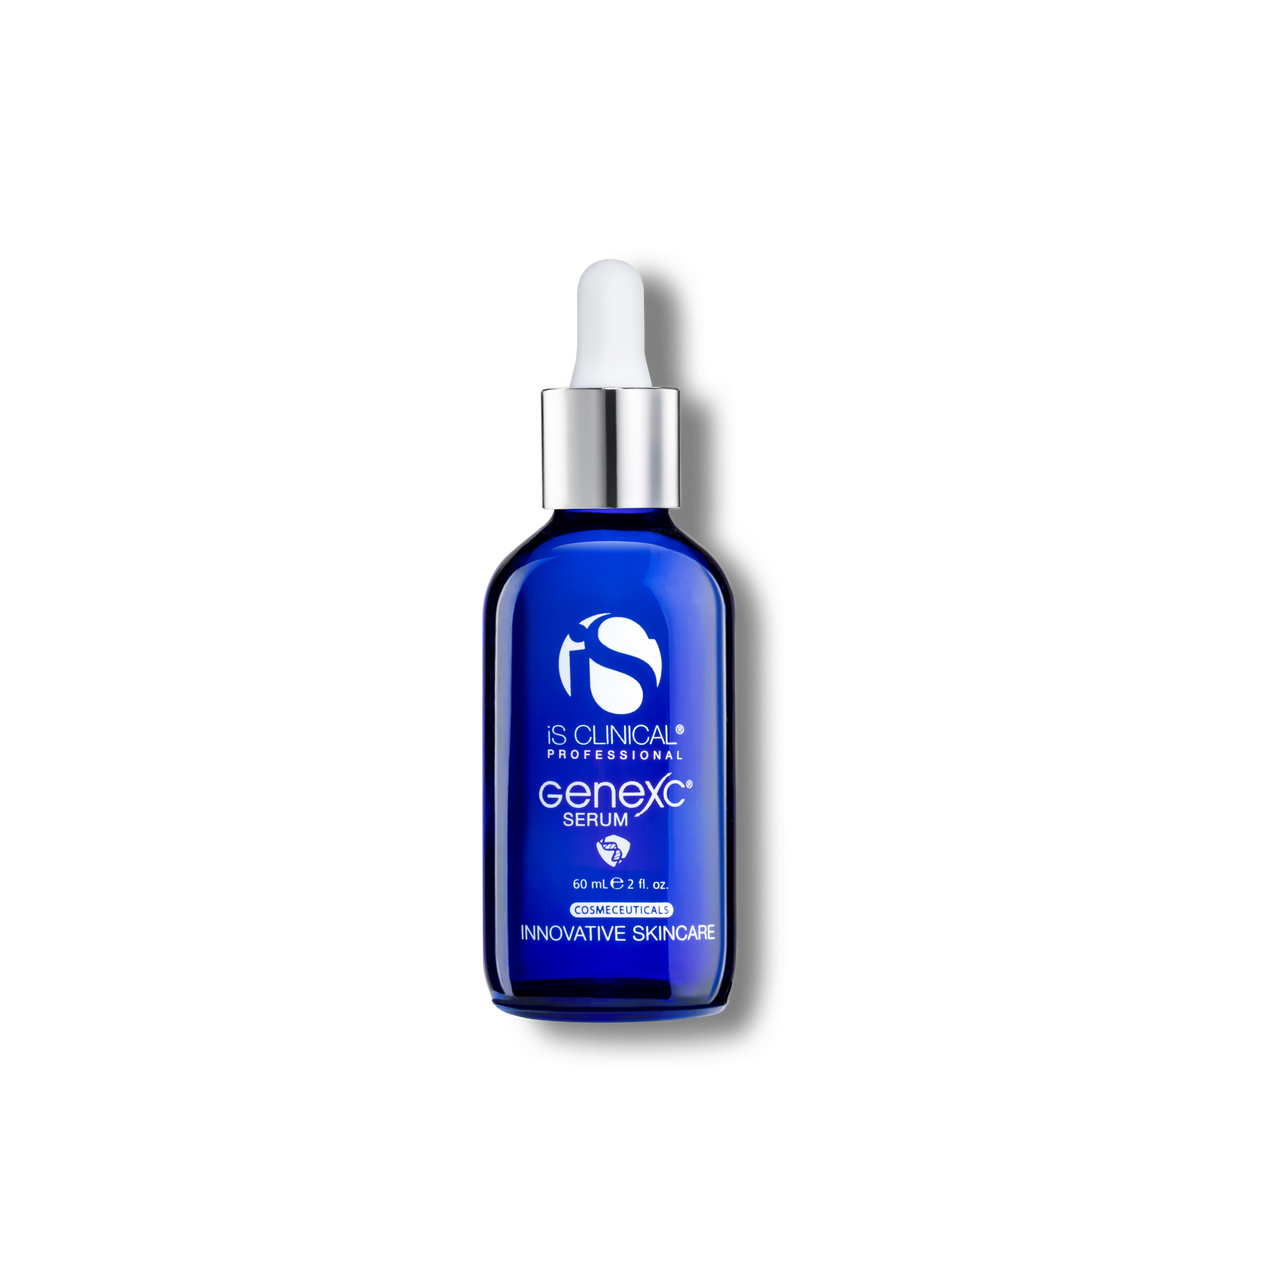 GeneXC Serum is a revolutionary formula featuring our proprietary combination of Extremozymes which are clinically proven to help protect, revitalise, and enhance the foundation of healthy skin, while supporting multi-level protection and long-term visual improvements.